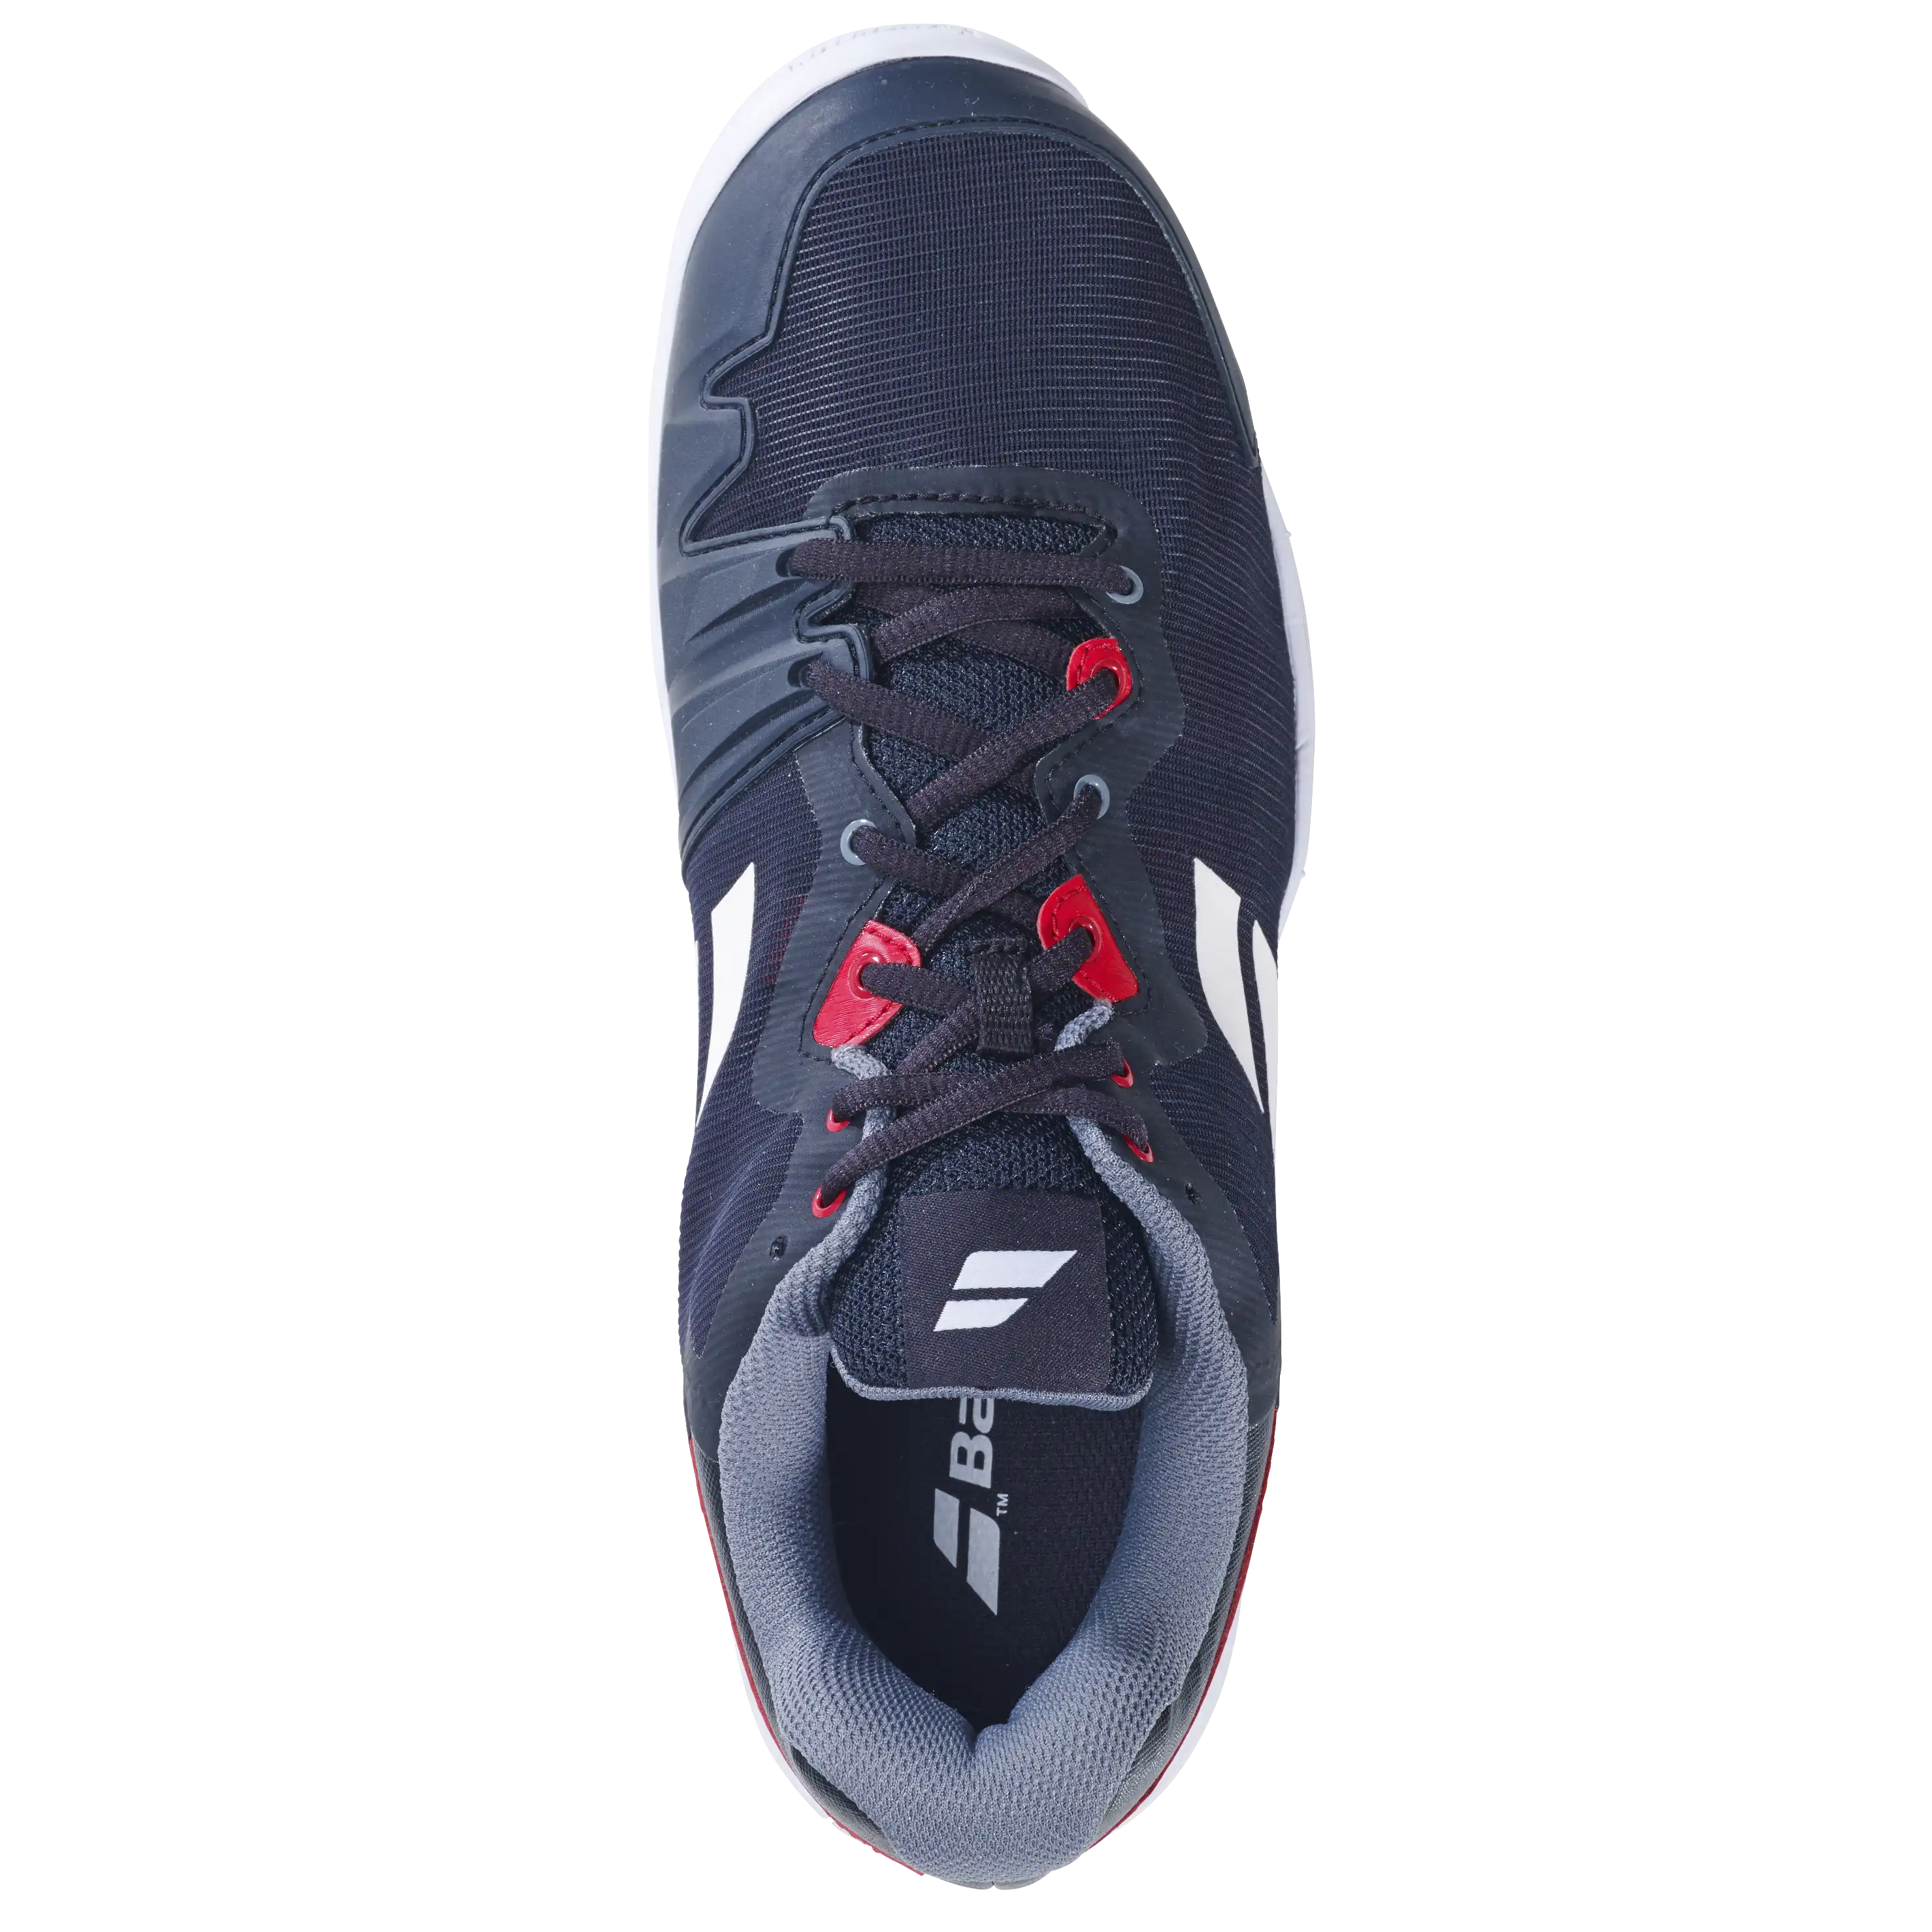 Babolat Men's SFX 3 All Court Tennis Shoe In Black/Red